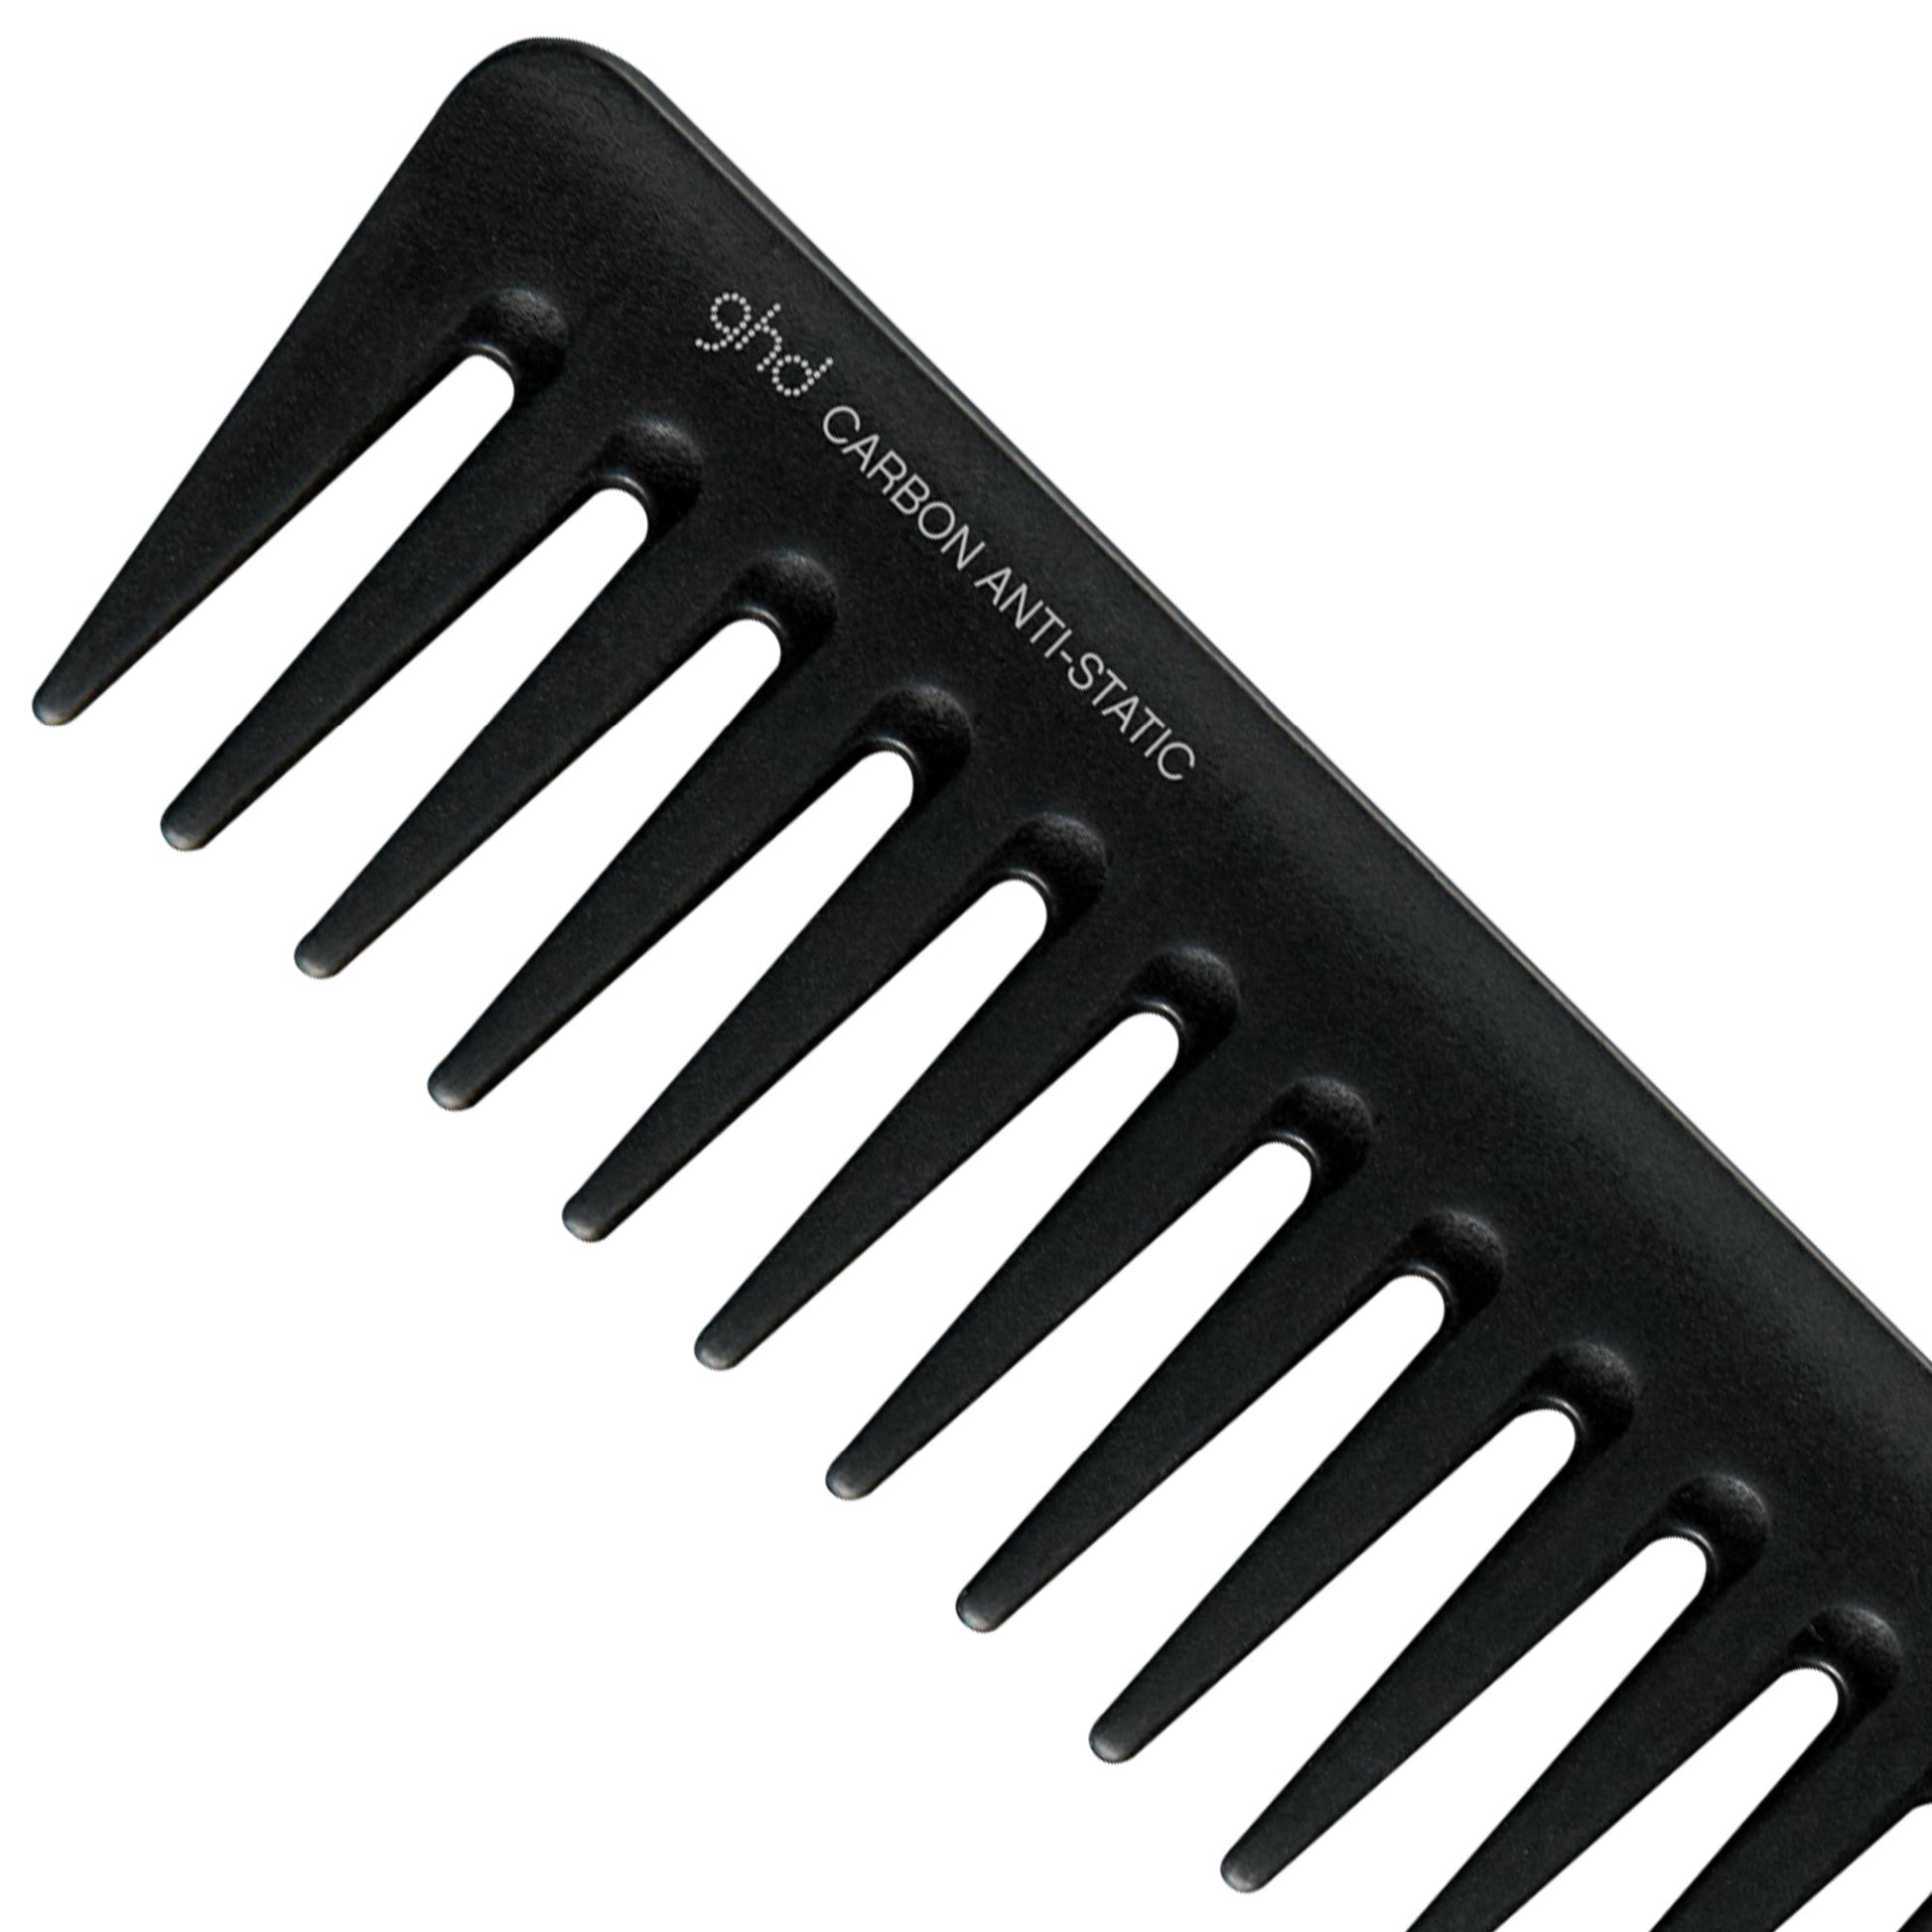 GHD Detangling Comb - shelley and co